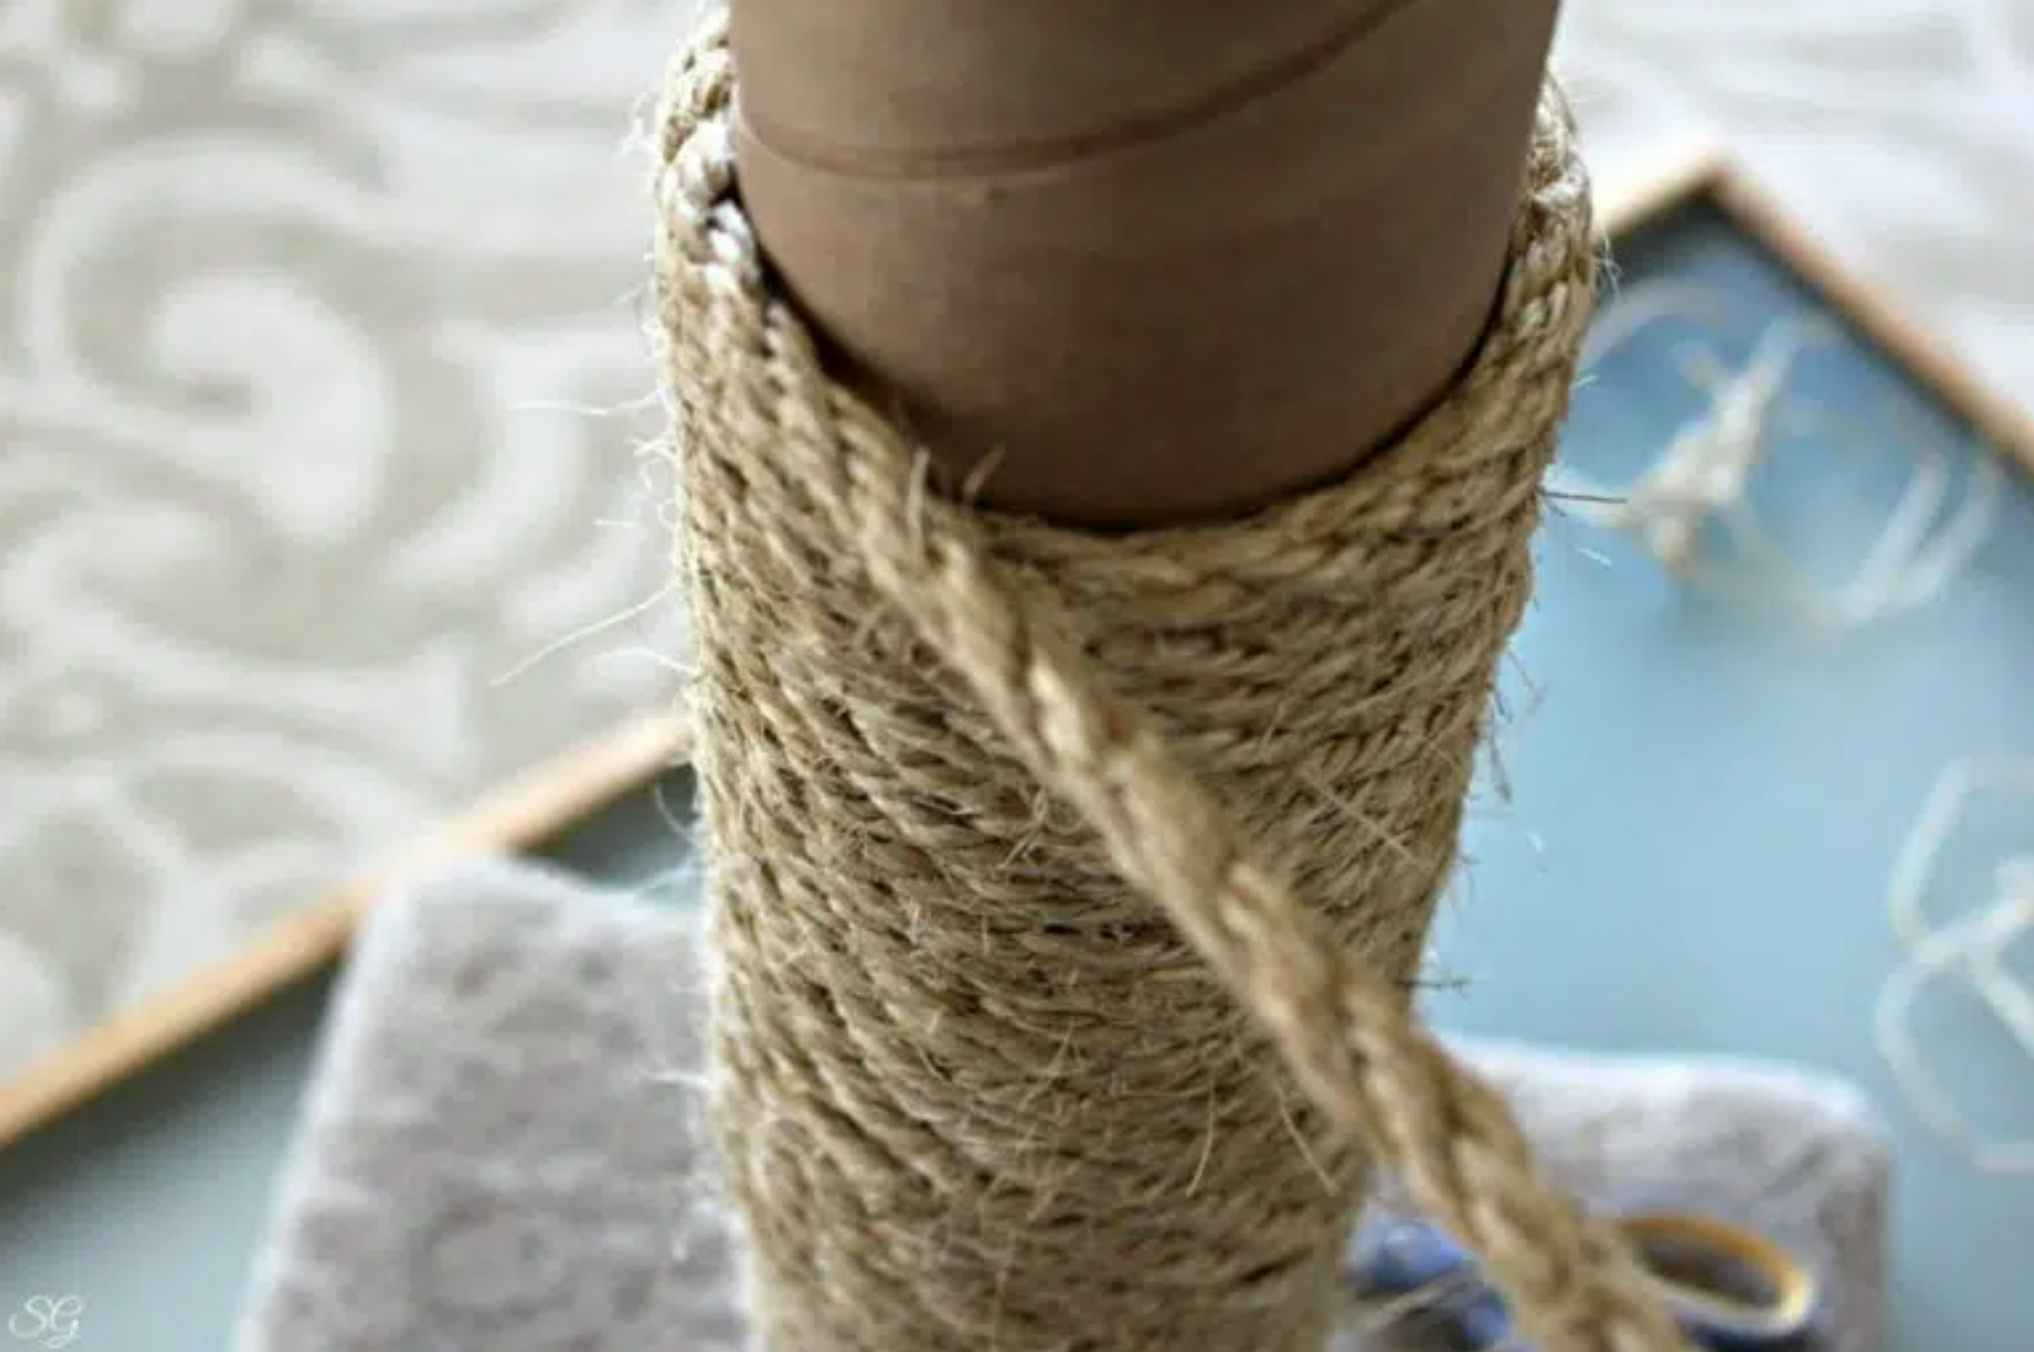 A rope being wound around a bare cat scratching post.